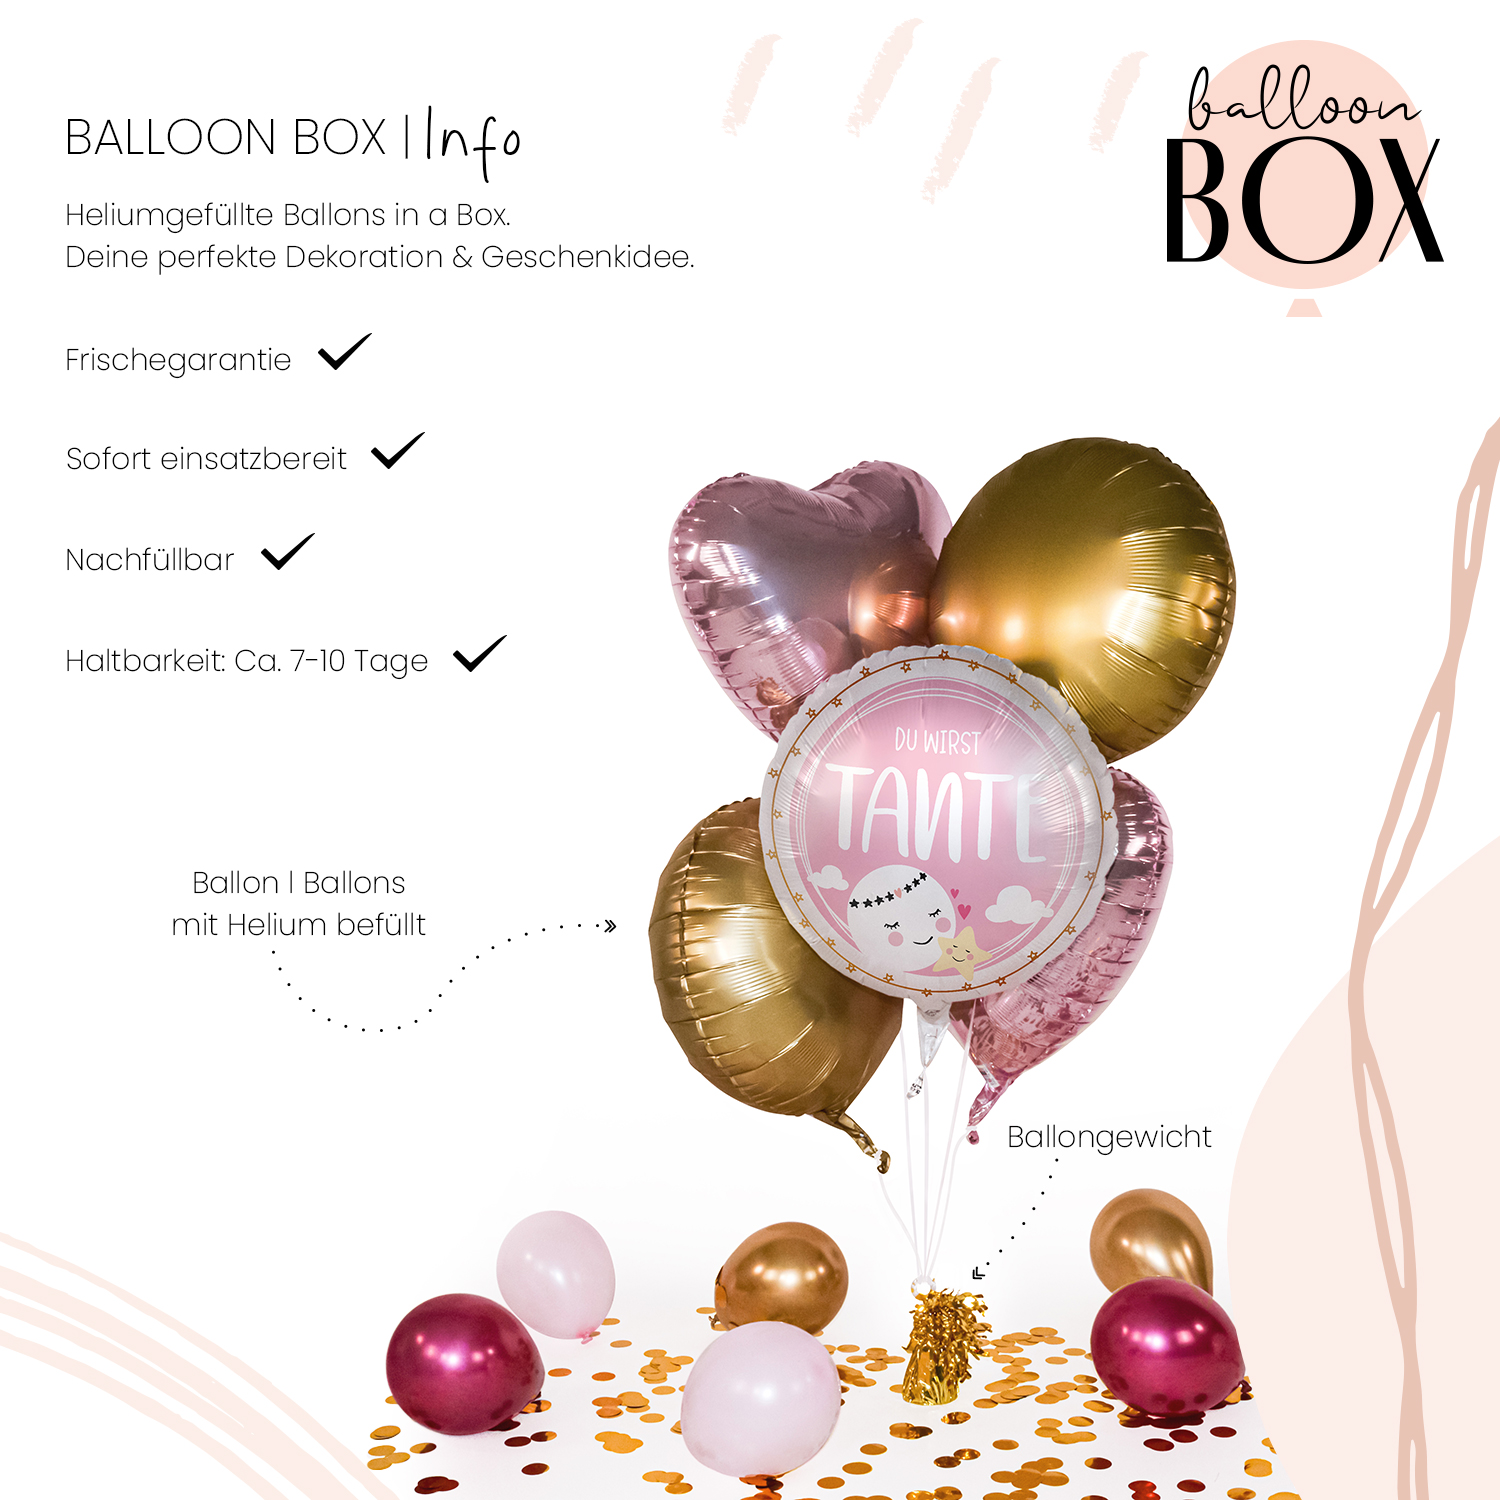 Heliumballon in a Box - Du wirst Tante